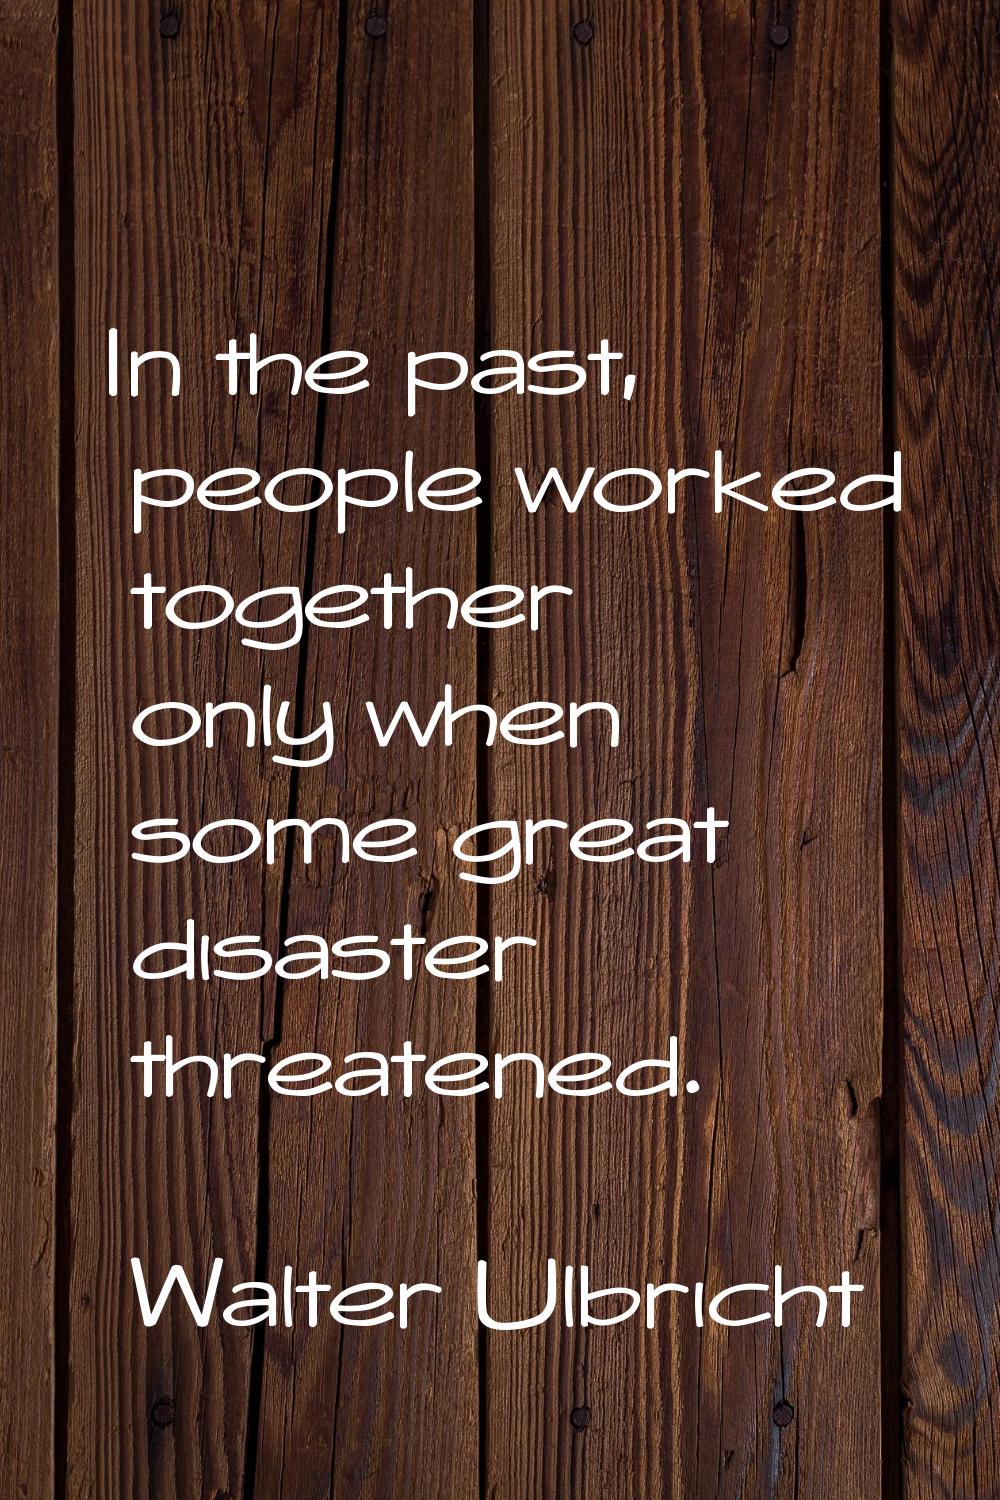 In the past, people worked together only when some great disaster threatened.